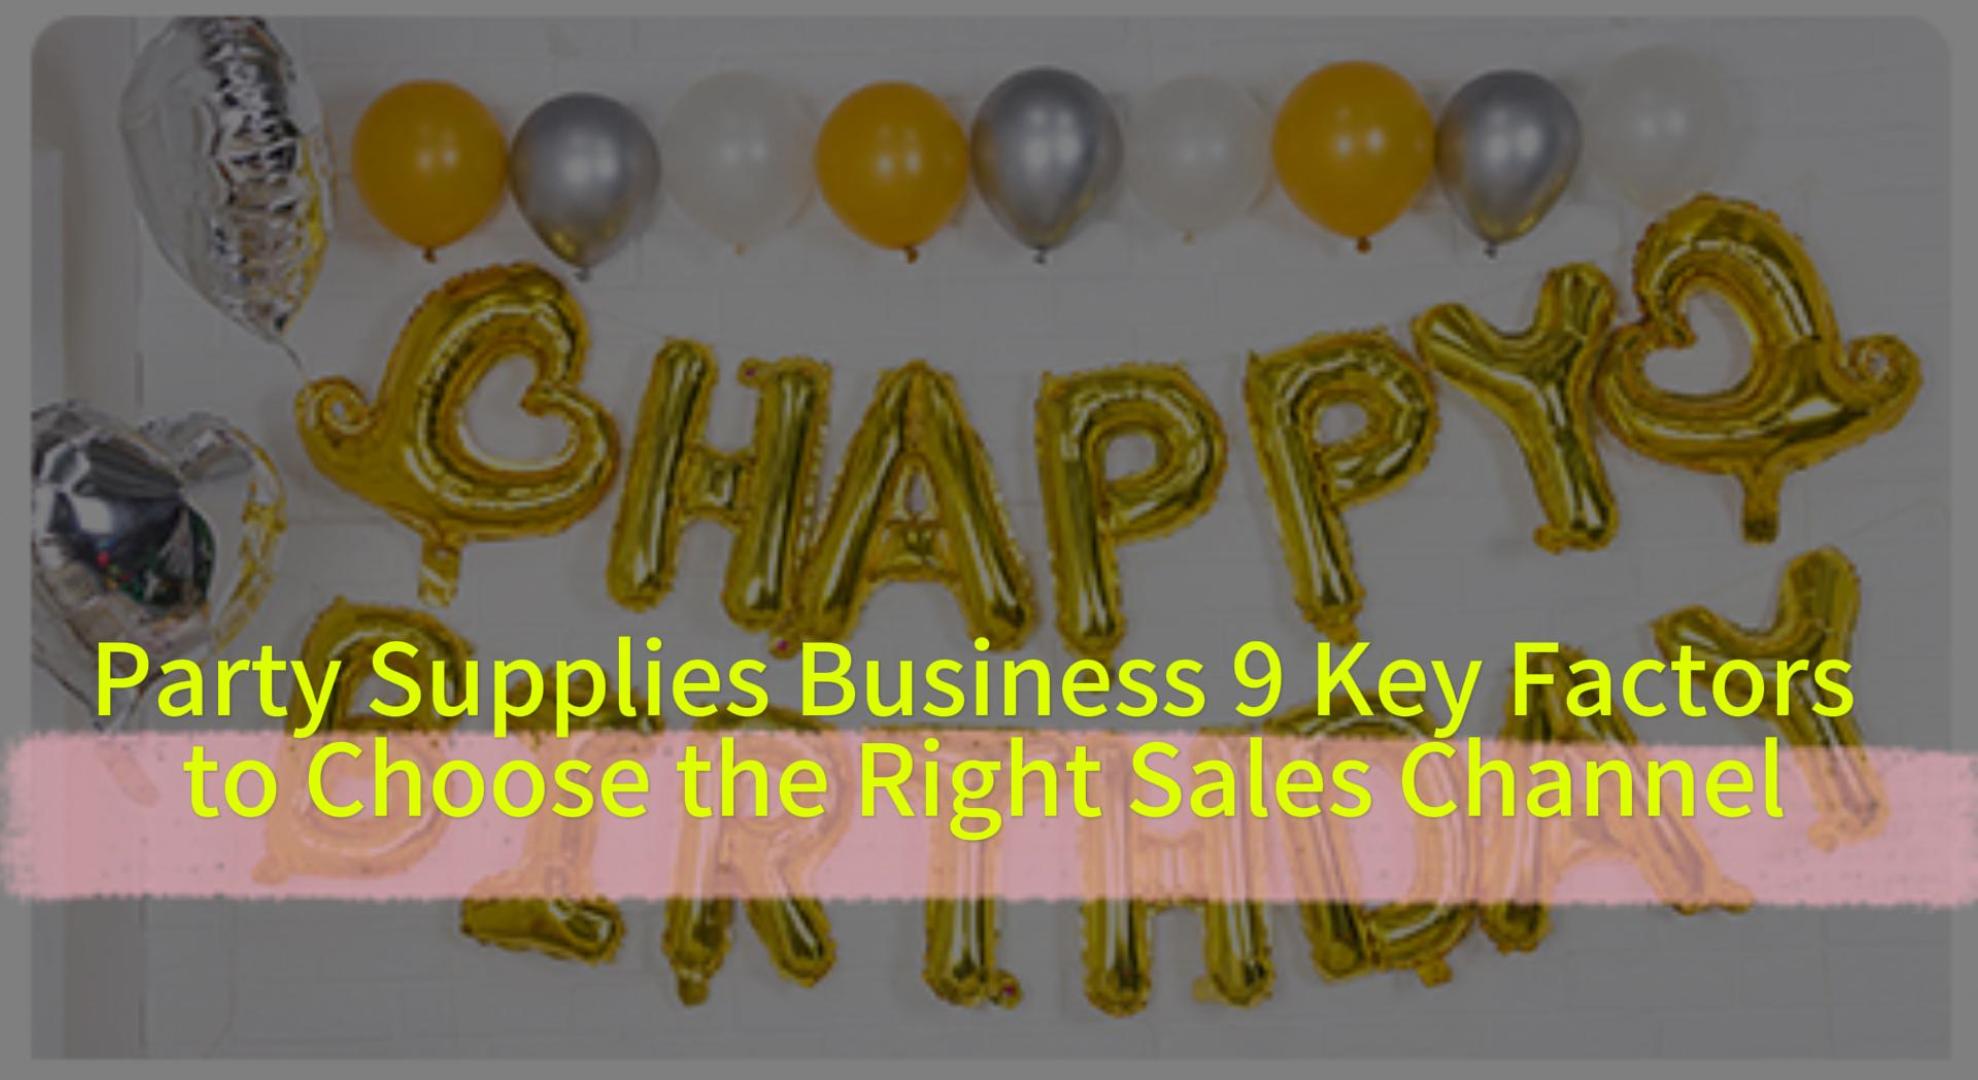 Party Supplies Business 9 Key Factors to Choose the Right Sales Channel